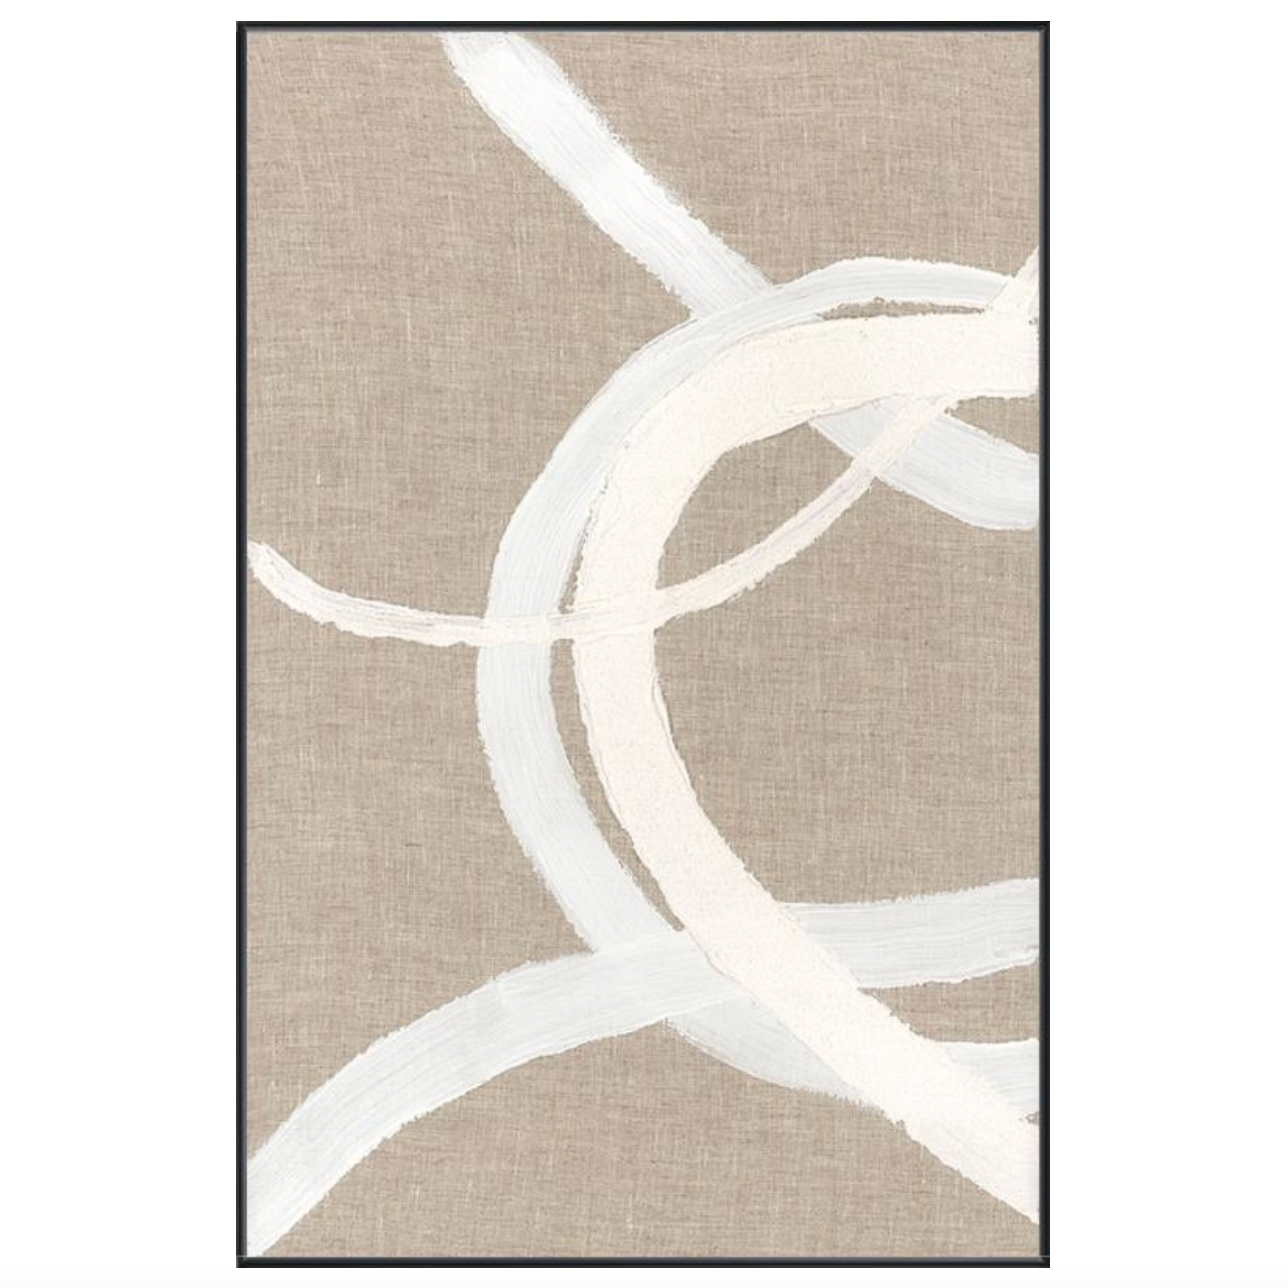 Hand painted on linen, this Trace of Rings I Art features a gorgeous textured abstract design. Complete the look with Trace of Rings II and III to elevate any bedroom, living room, or other area!   Artist: Beverly Fuller Product Type: Hand Painting Finish: Linen Hand Painting Size: 22" x 34" without frame